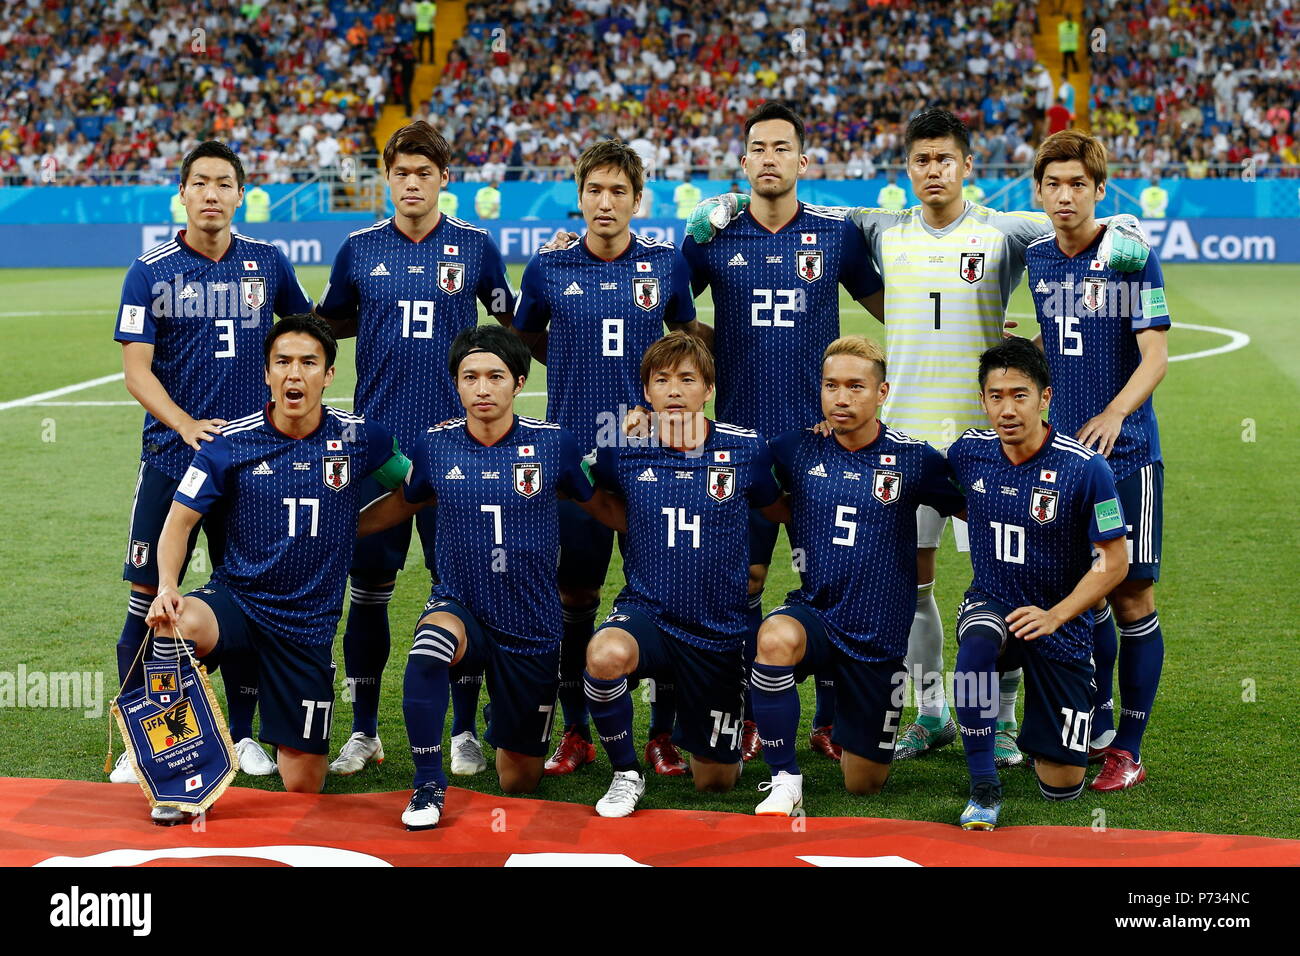 Rostov On Don, Russia. 2nd July, 2018. Japan team group line-up (JPN) Football/Soccer : FIFA World Cup Russia 2018 match between Belgium 3-2 Japan at the Rostov Arena in Rostov On Don, Russia . Credit: Mutsu KAWAMORI/AFLO/Alamy Live News Stock Photo